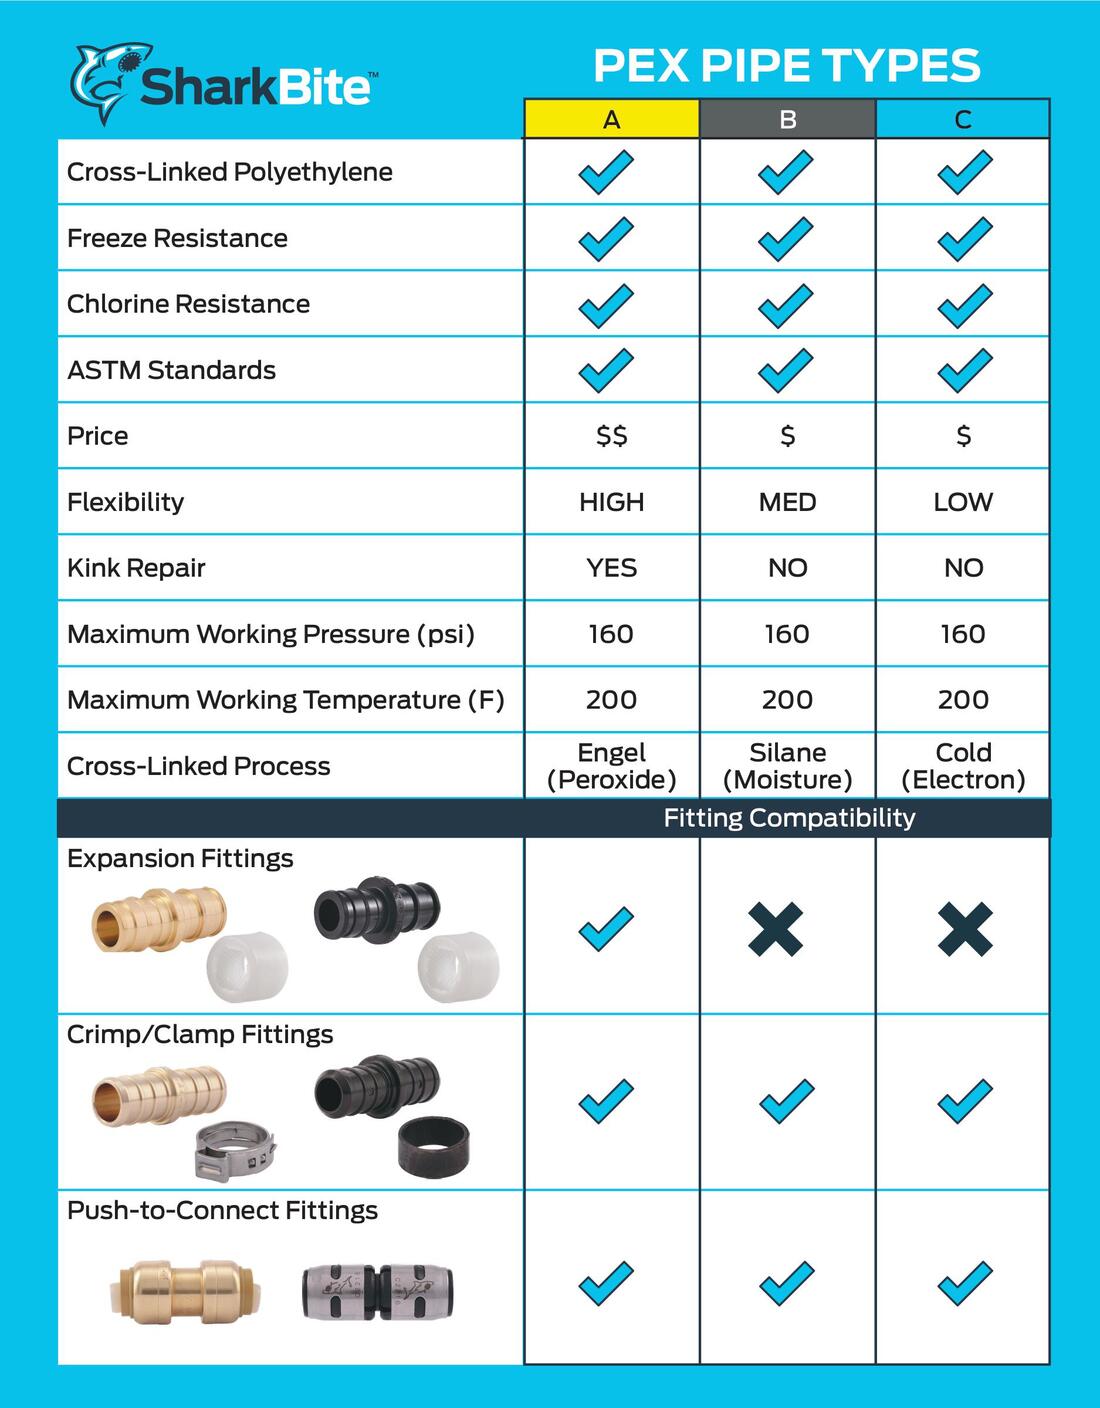 SharkBite PEX Pipe and Fitting types. Chart outlines installation compatibility and features by PEX type.